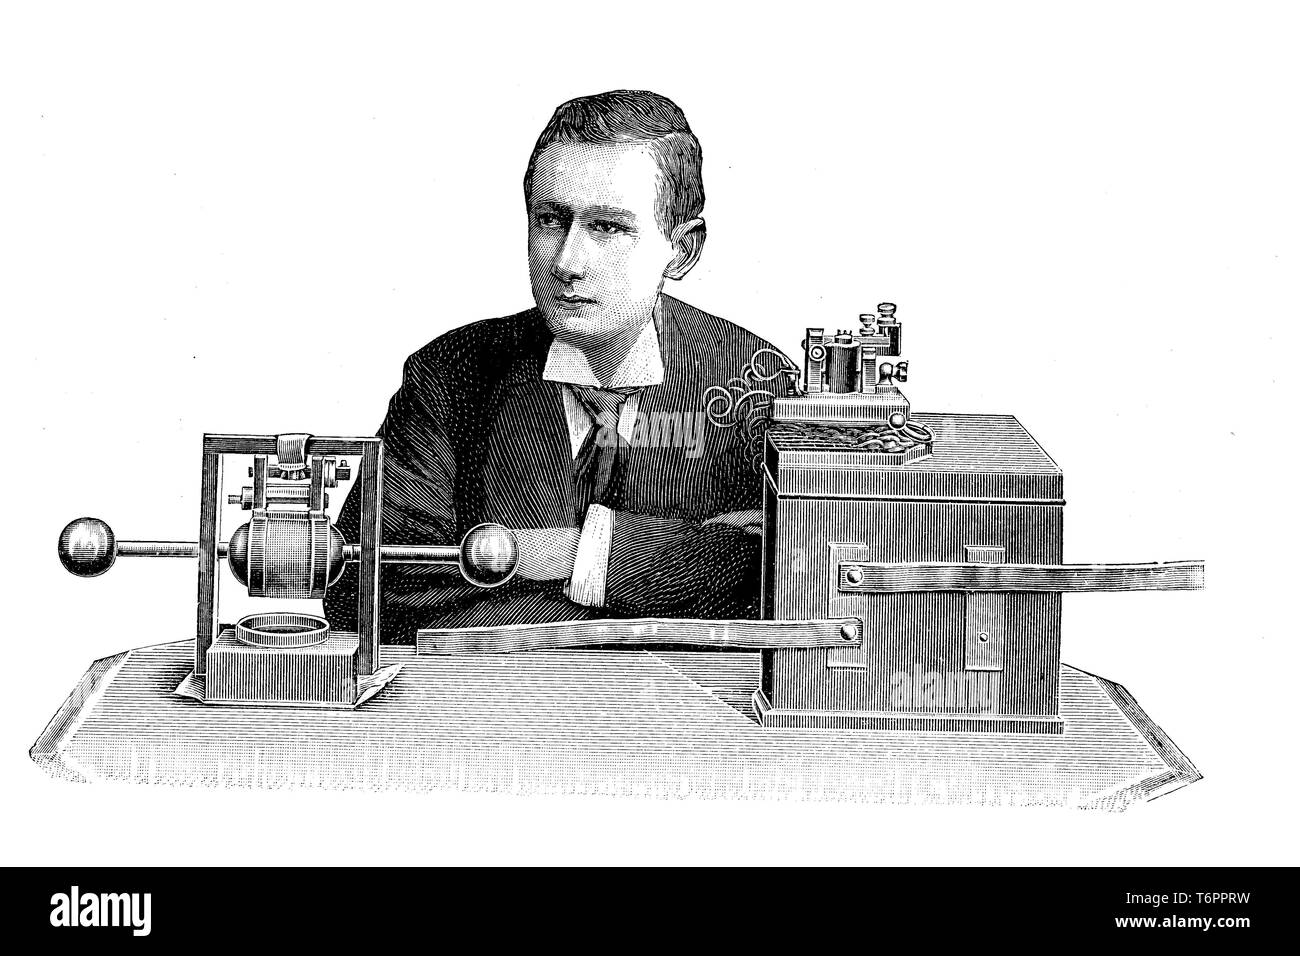 Guglielmo Marconi demonstrating apparatus he used in his first long distance radio transmissions in the 1890, historical illustration, Italy Stock Photo